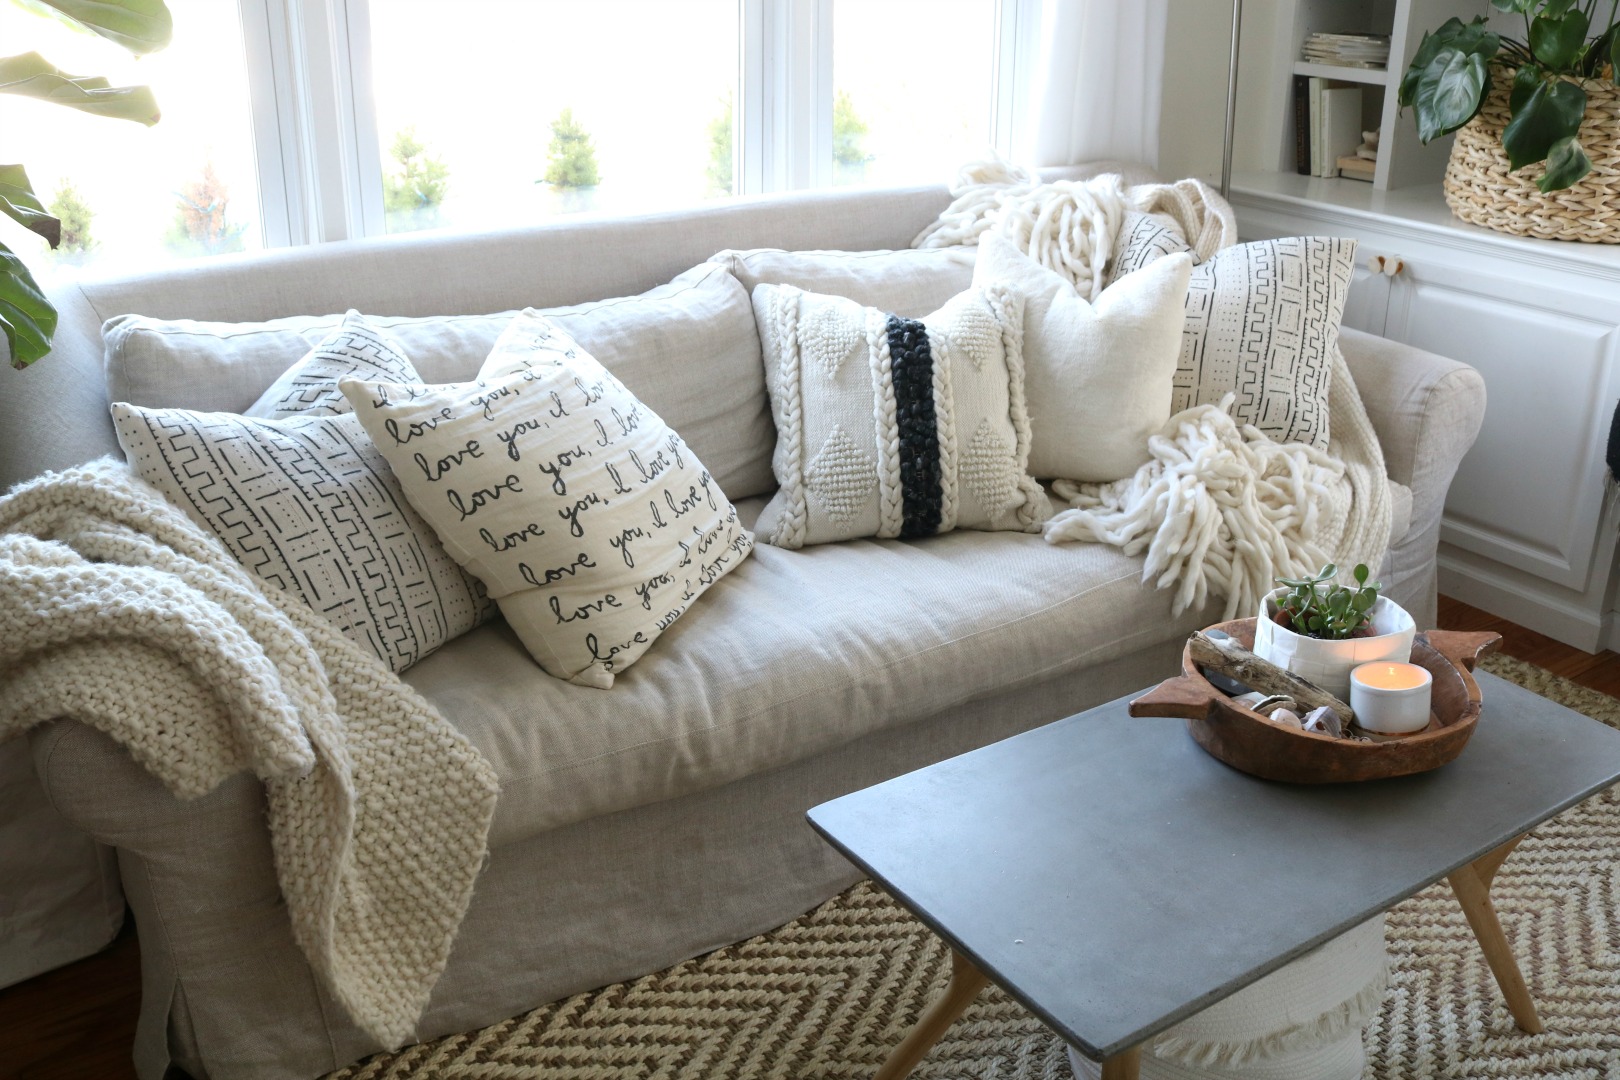 How to Mix Pillow Patterns like a Pro!